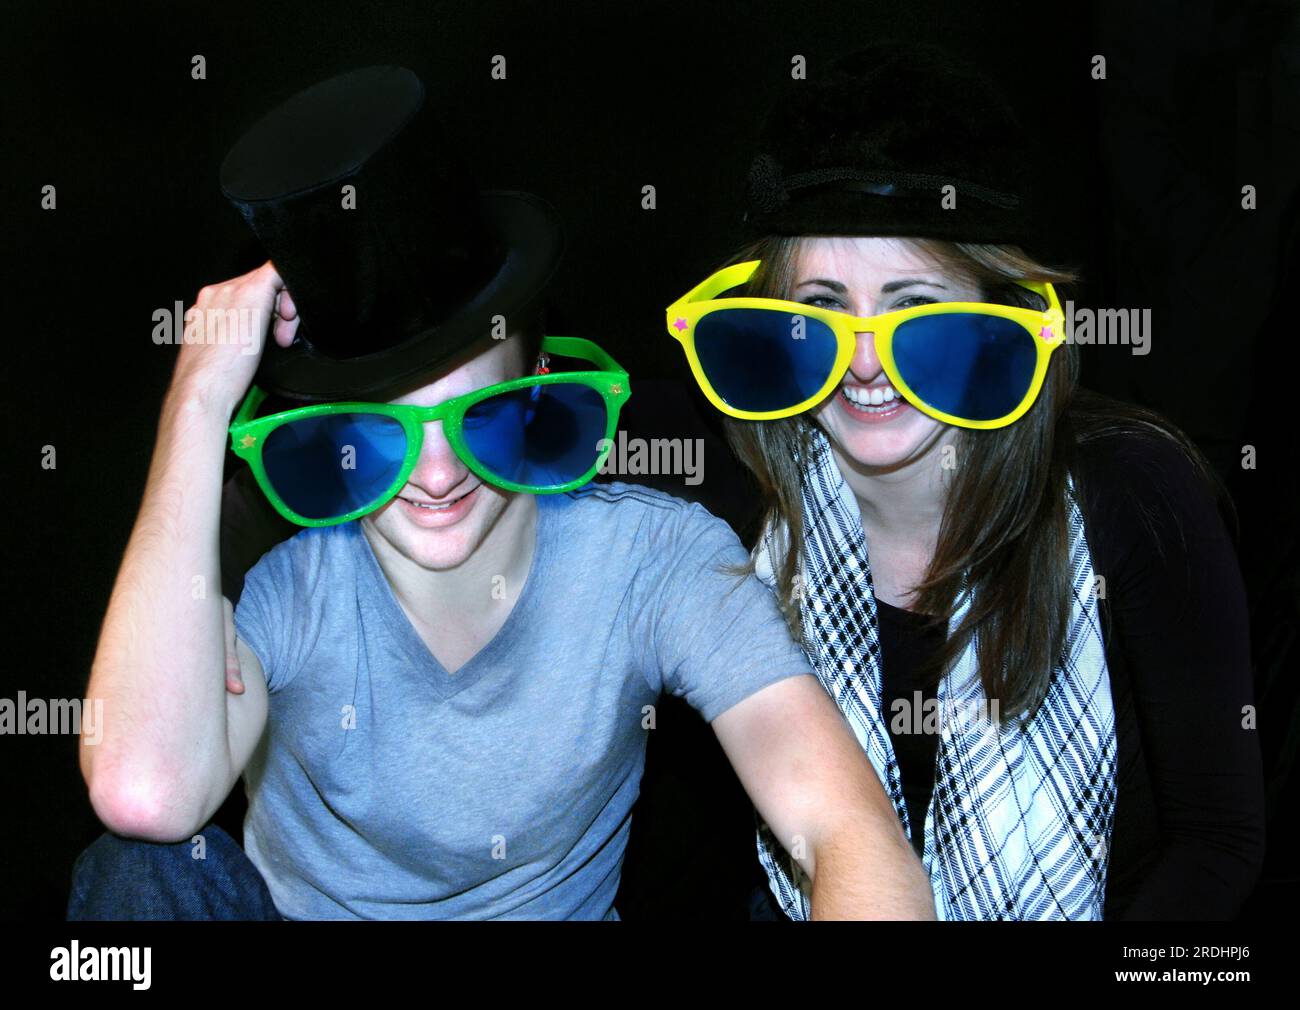 Young couple clown around with hats and oversized sunglasses.  They are both smiling and the man is tipping his top hat. Stock Photo